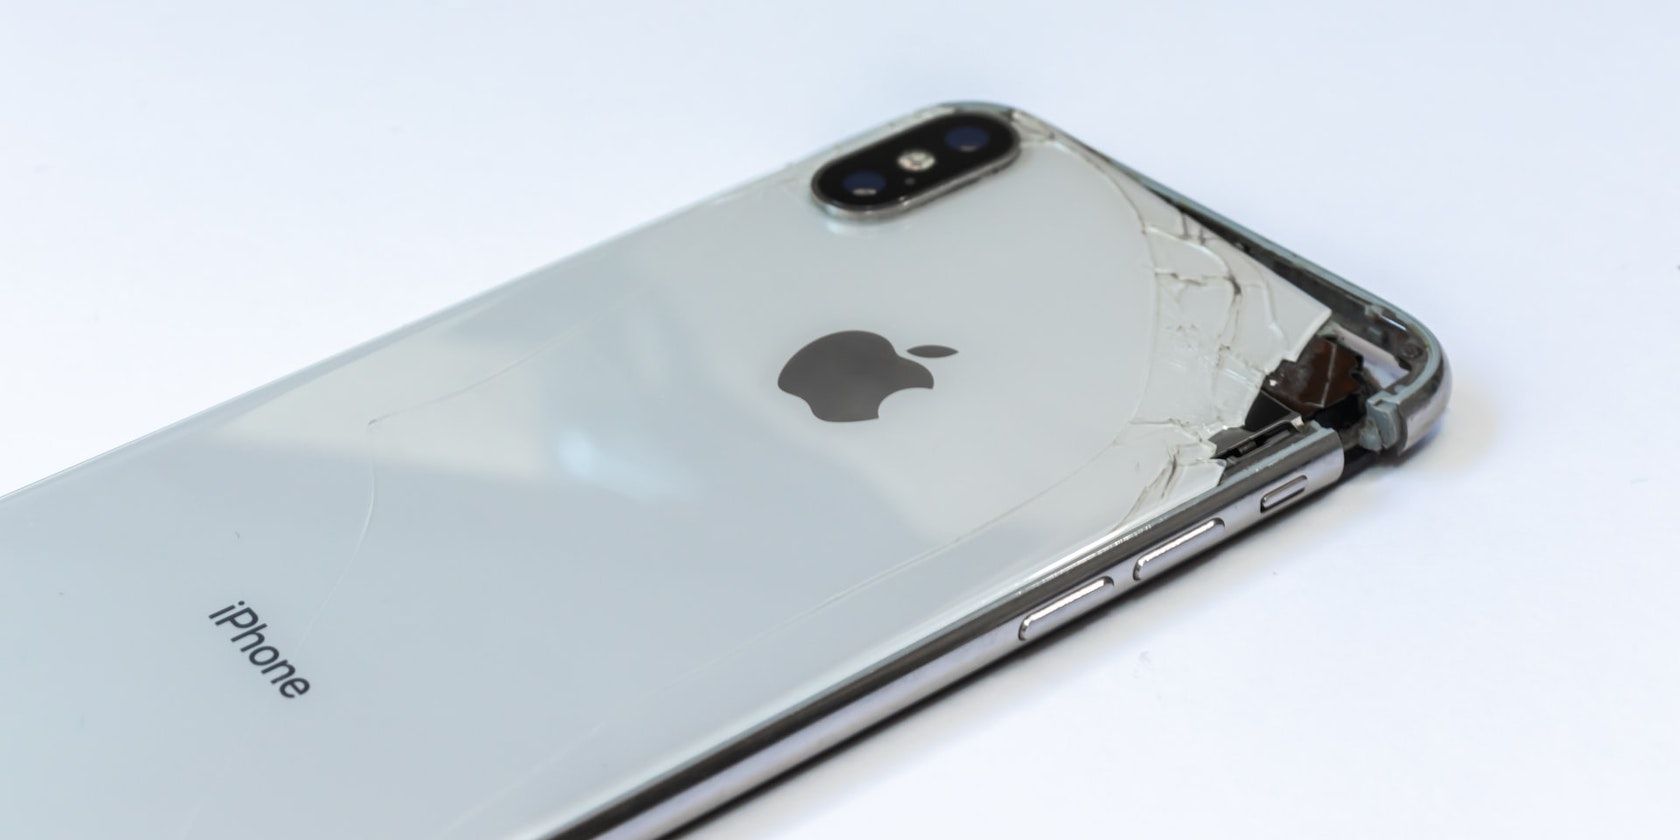 A close up of a broken silver iPhone on a plain white background